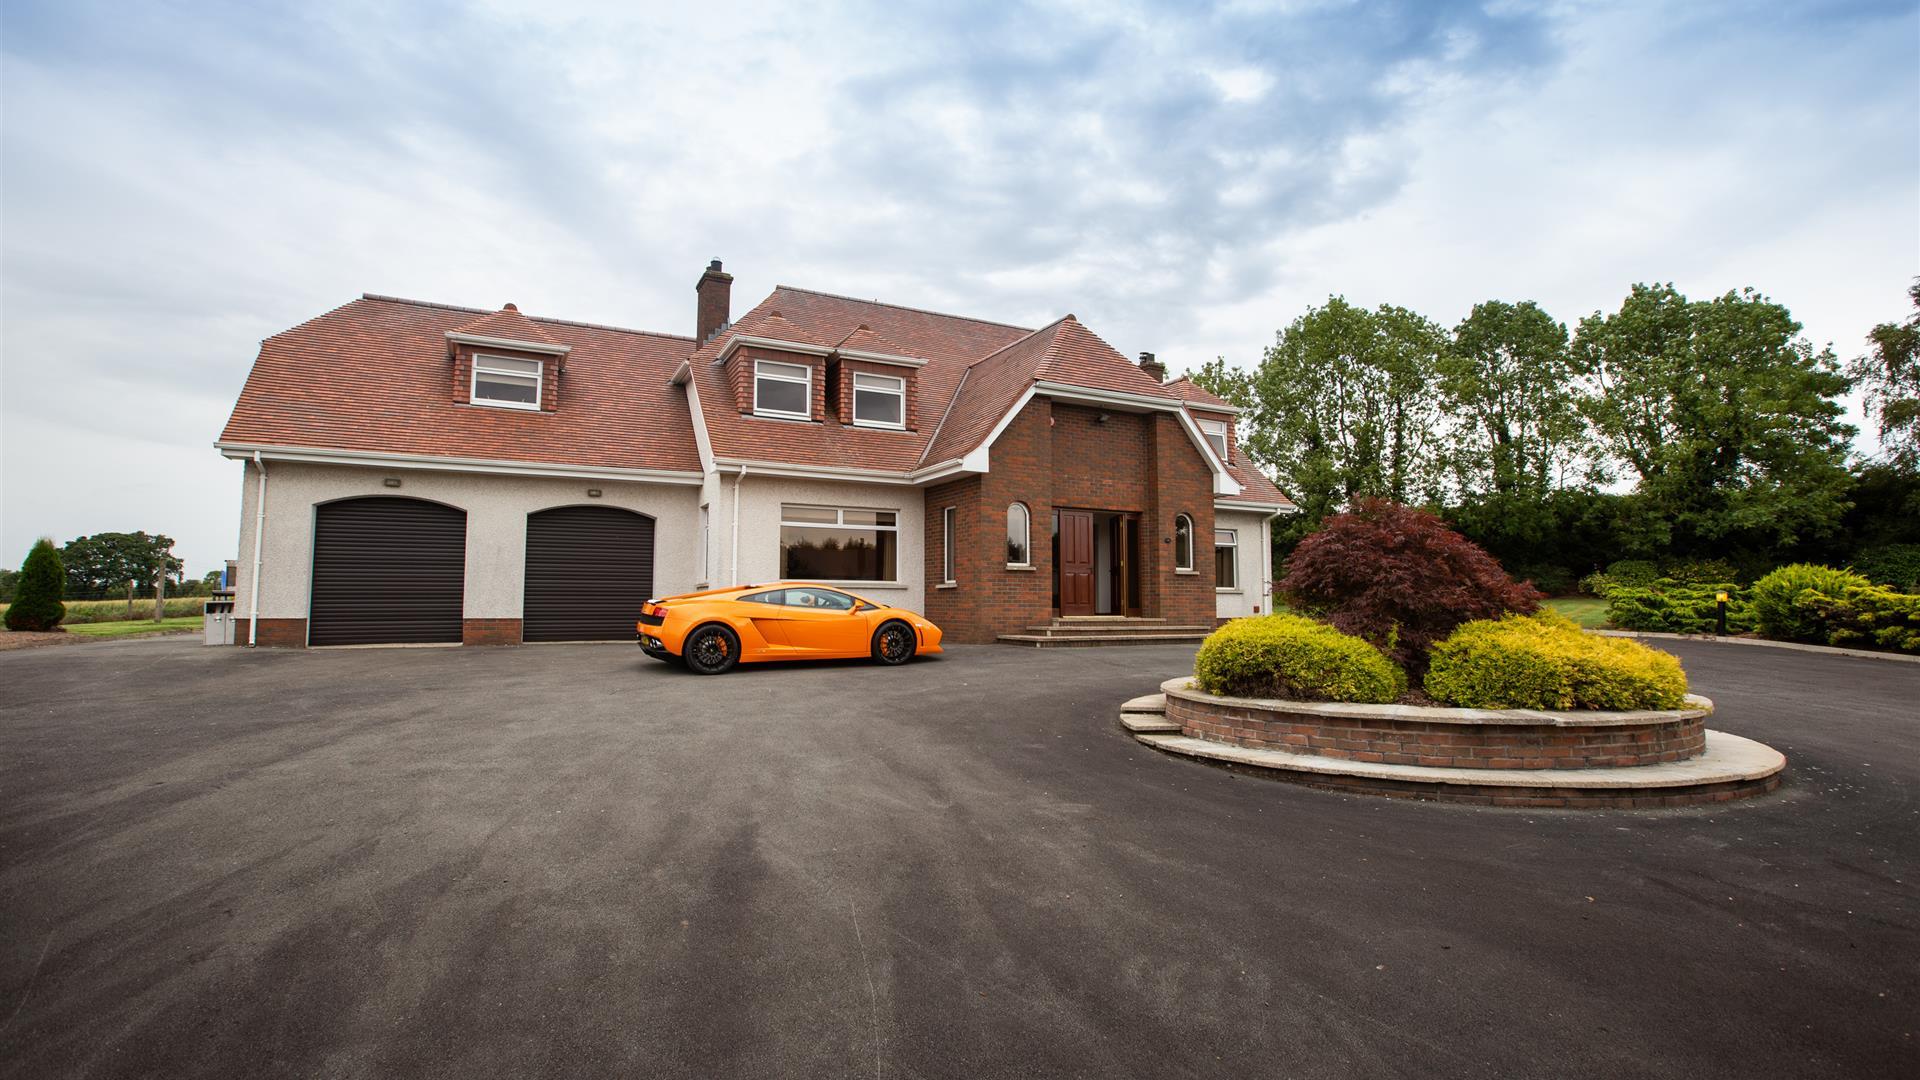 Image shows front of property with orange coloured super car in the large driveway